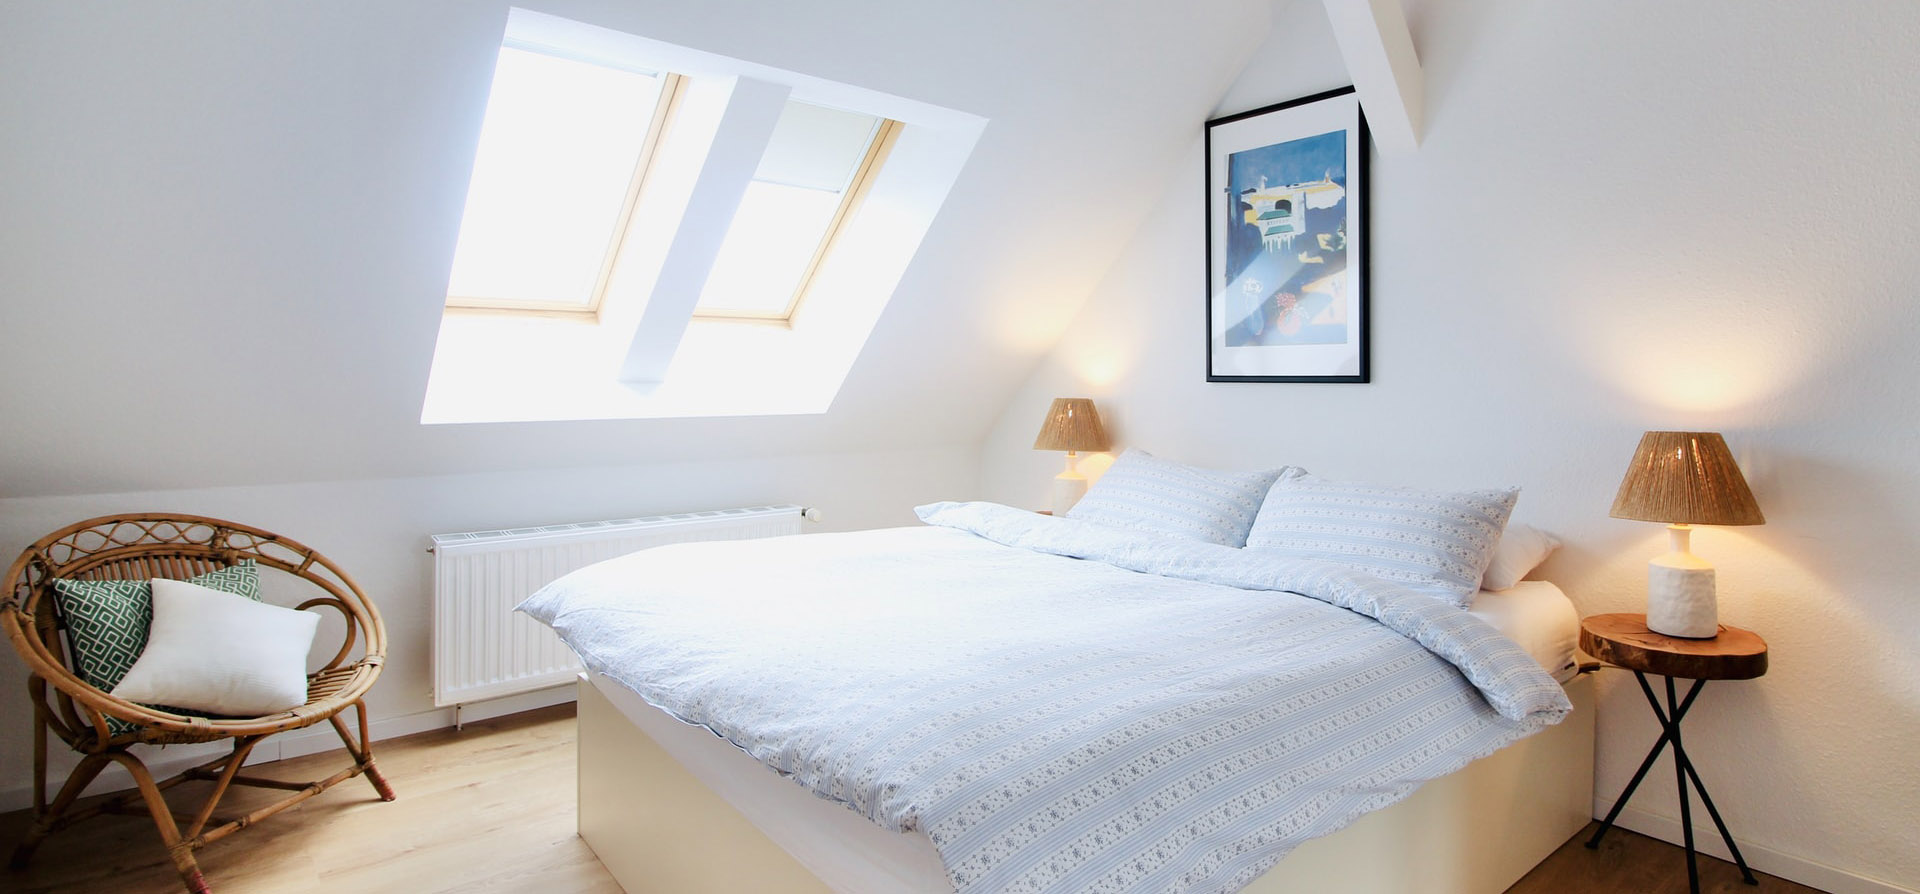 Attic bedroom | How to be the best York Airbnb Superhost | Airbnb laundry services